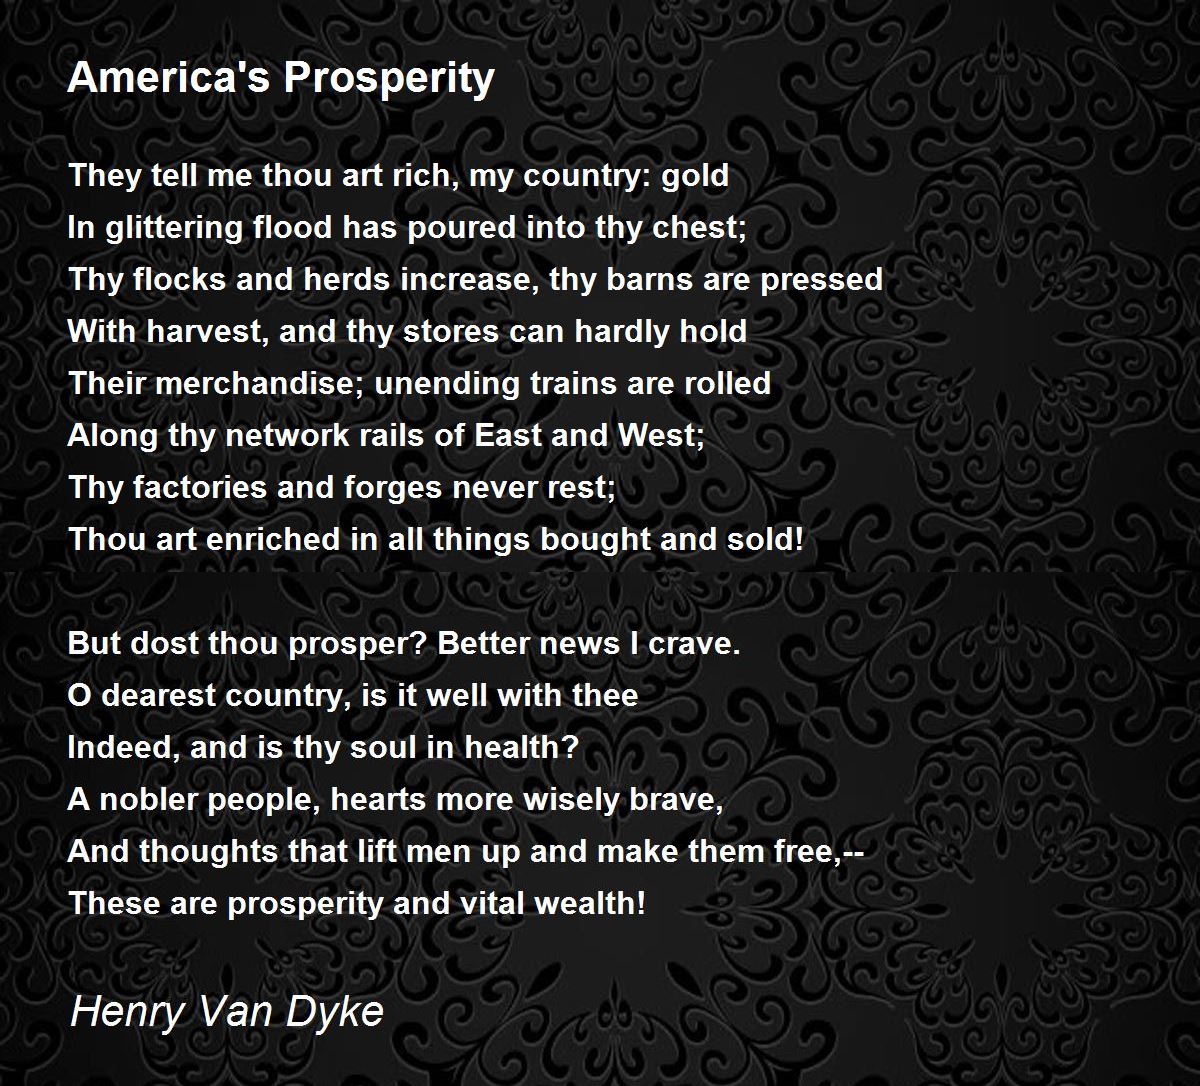 America's Prosperity poem summary, analysis and comments. 